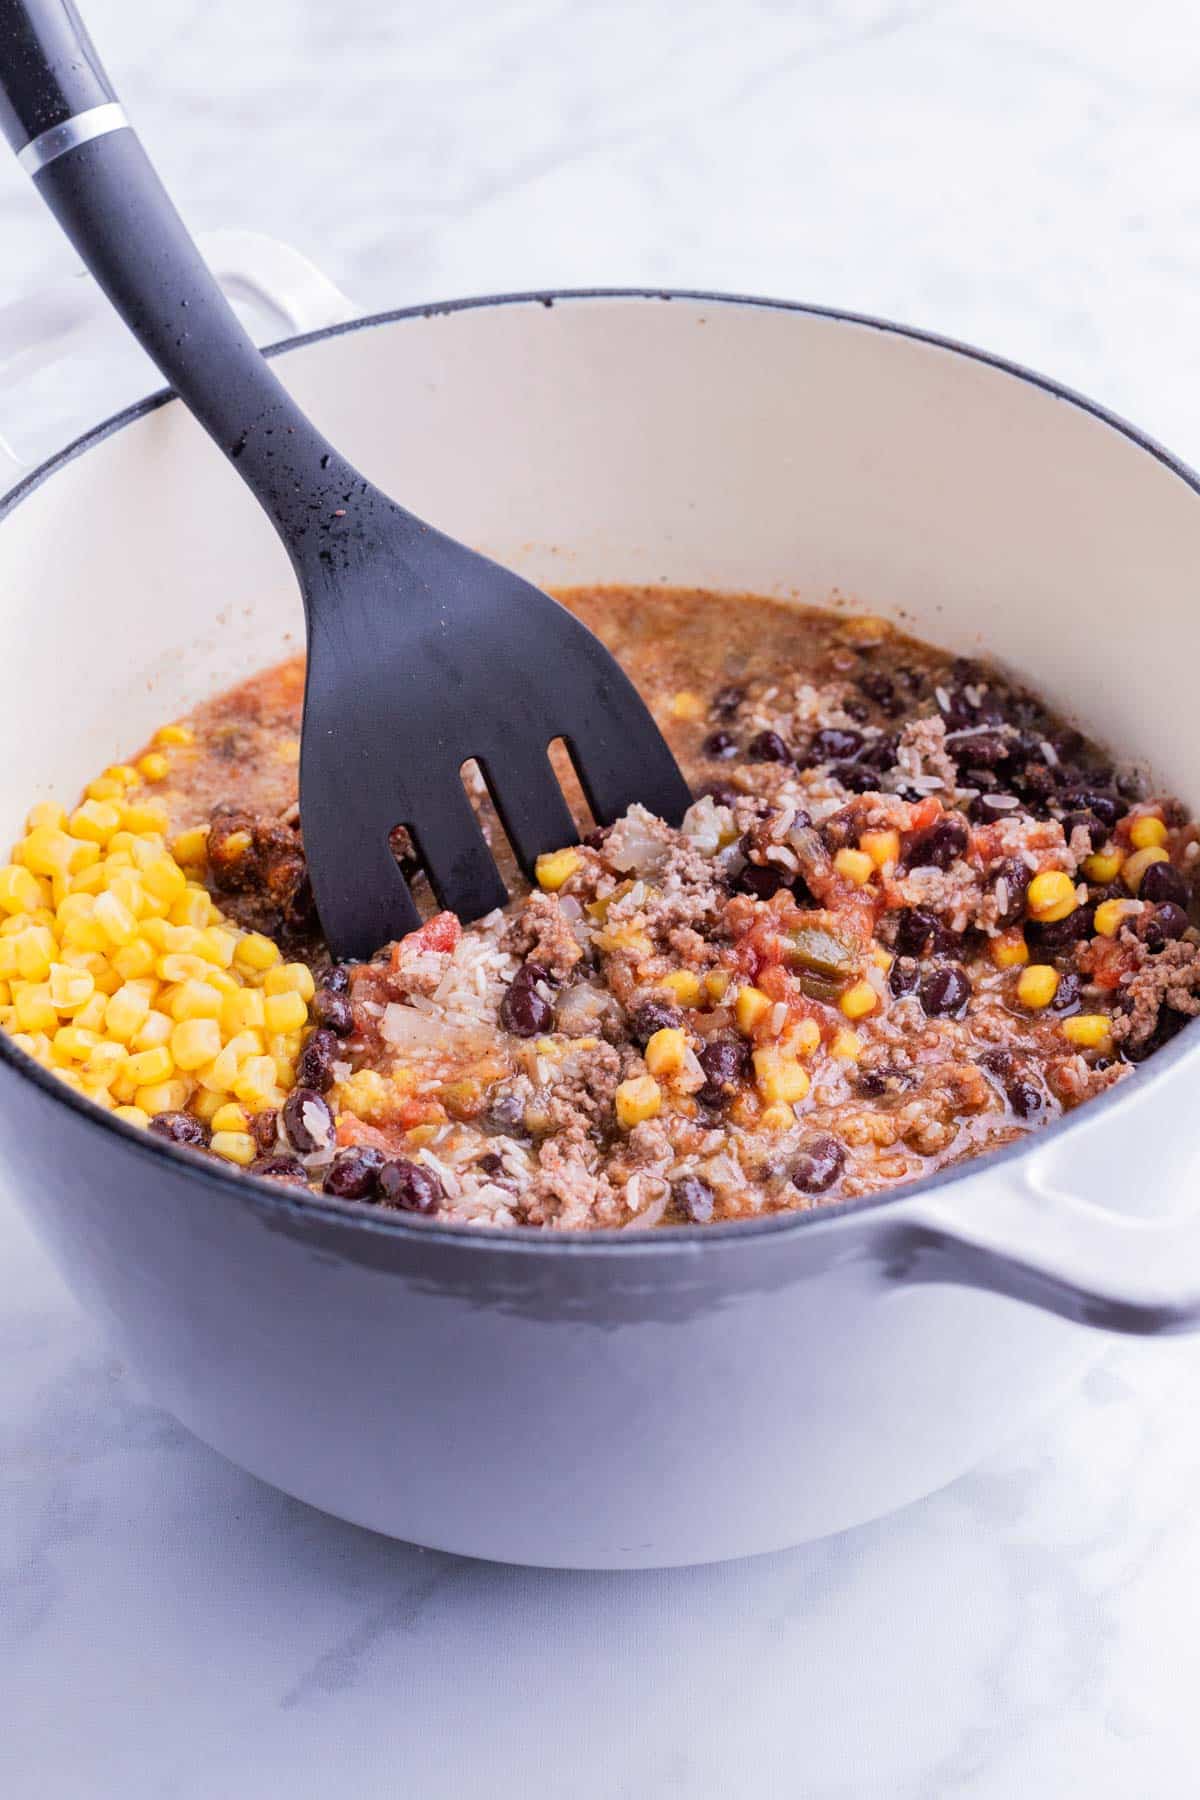 Rice, corn, black beans, seasonings, and the beef are added back into the pot.